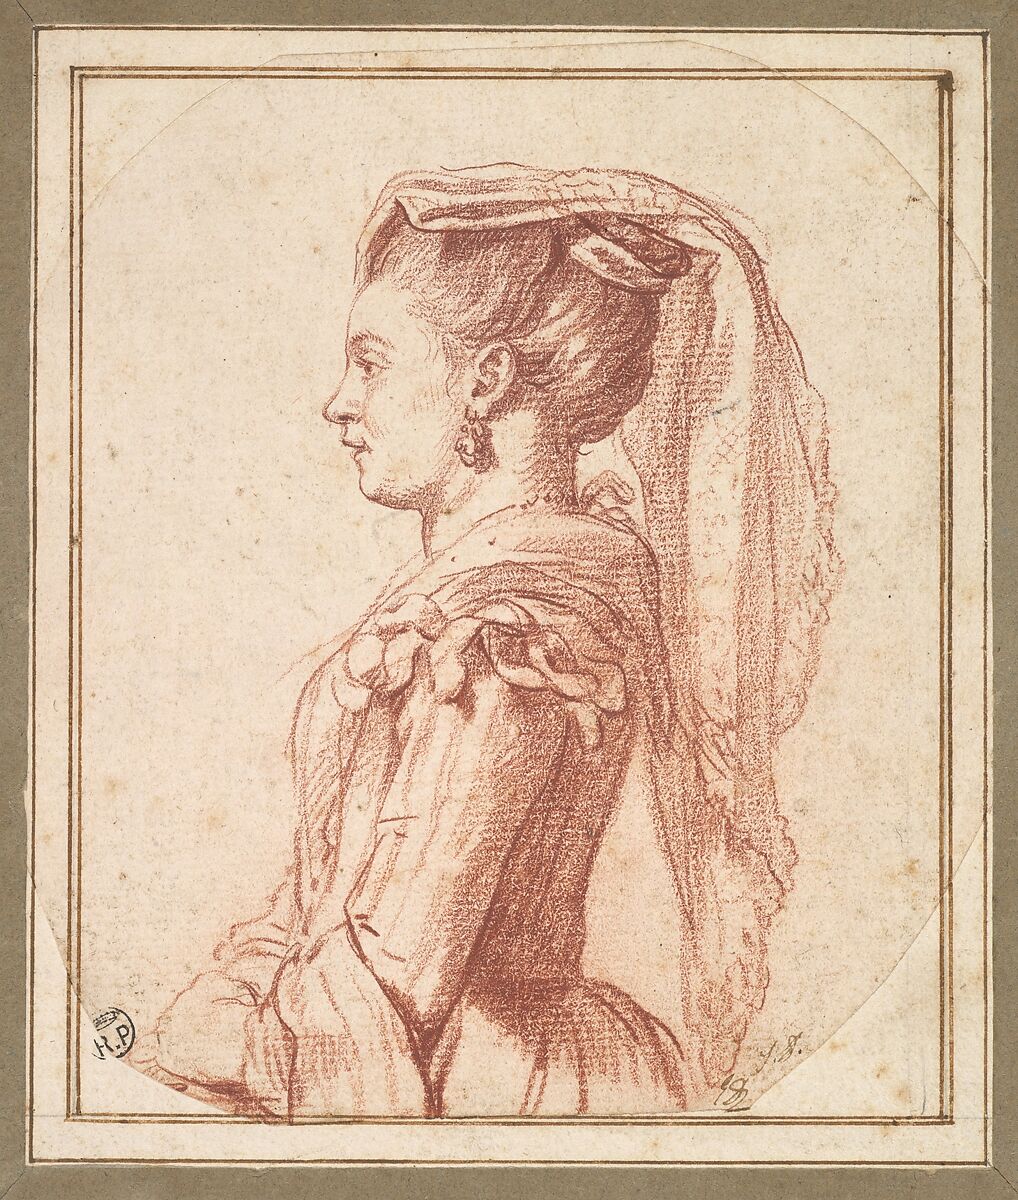 A Young Woman of Frascati, Jacques Louis David  French, Red chalk; framing lines in pen and brown ink, irregularly cut